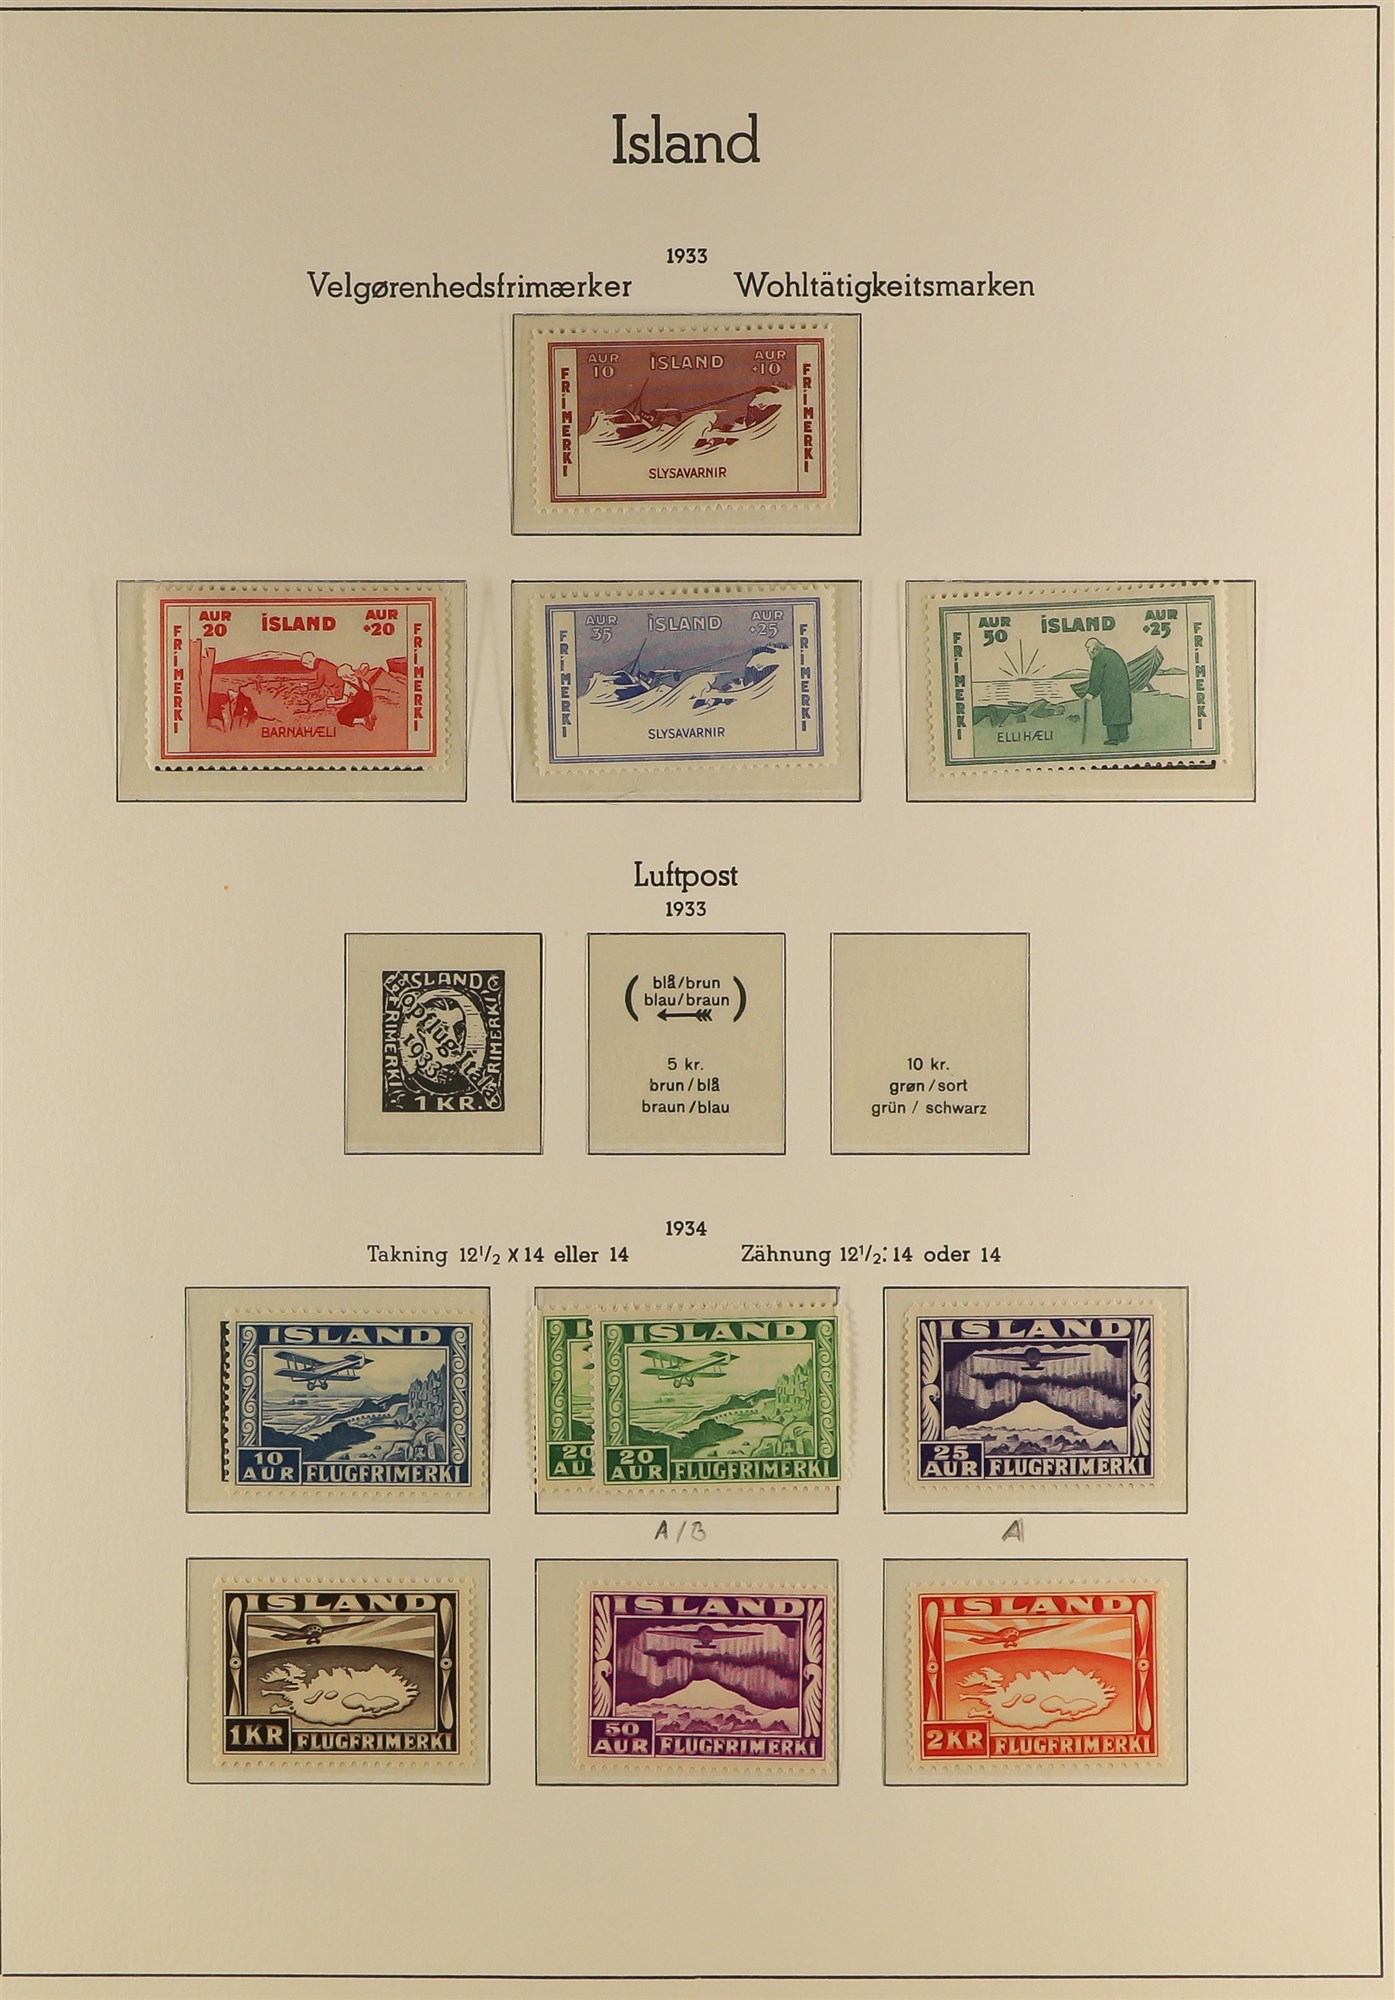 ICELAND 1918 - 1939 MINT / NEVER HINGED MINT COLLECTION. on hingeless Iceland album pages, many sets - Image 4 of 8